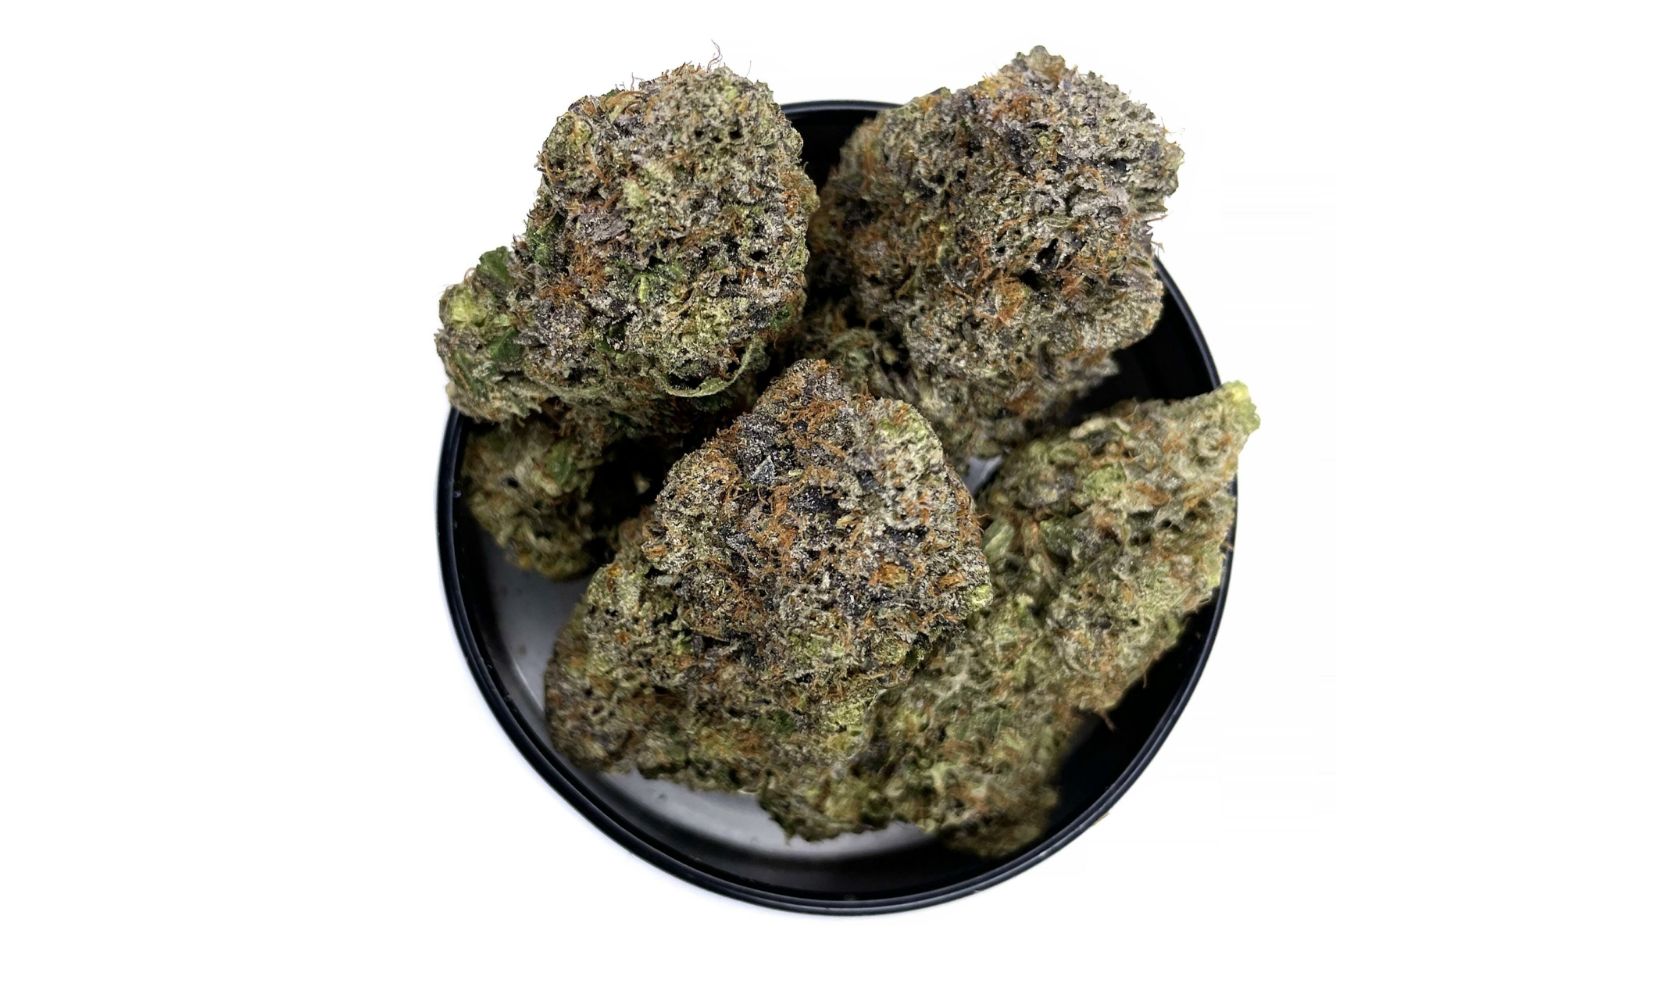 Buy Pink Kush Online in Canada: Guide To This Strain